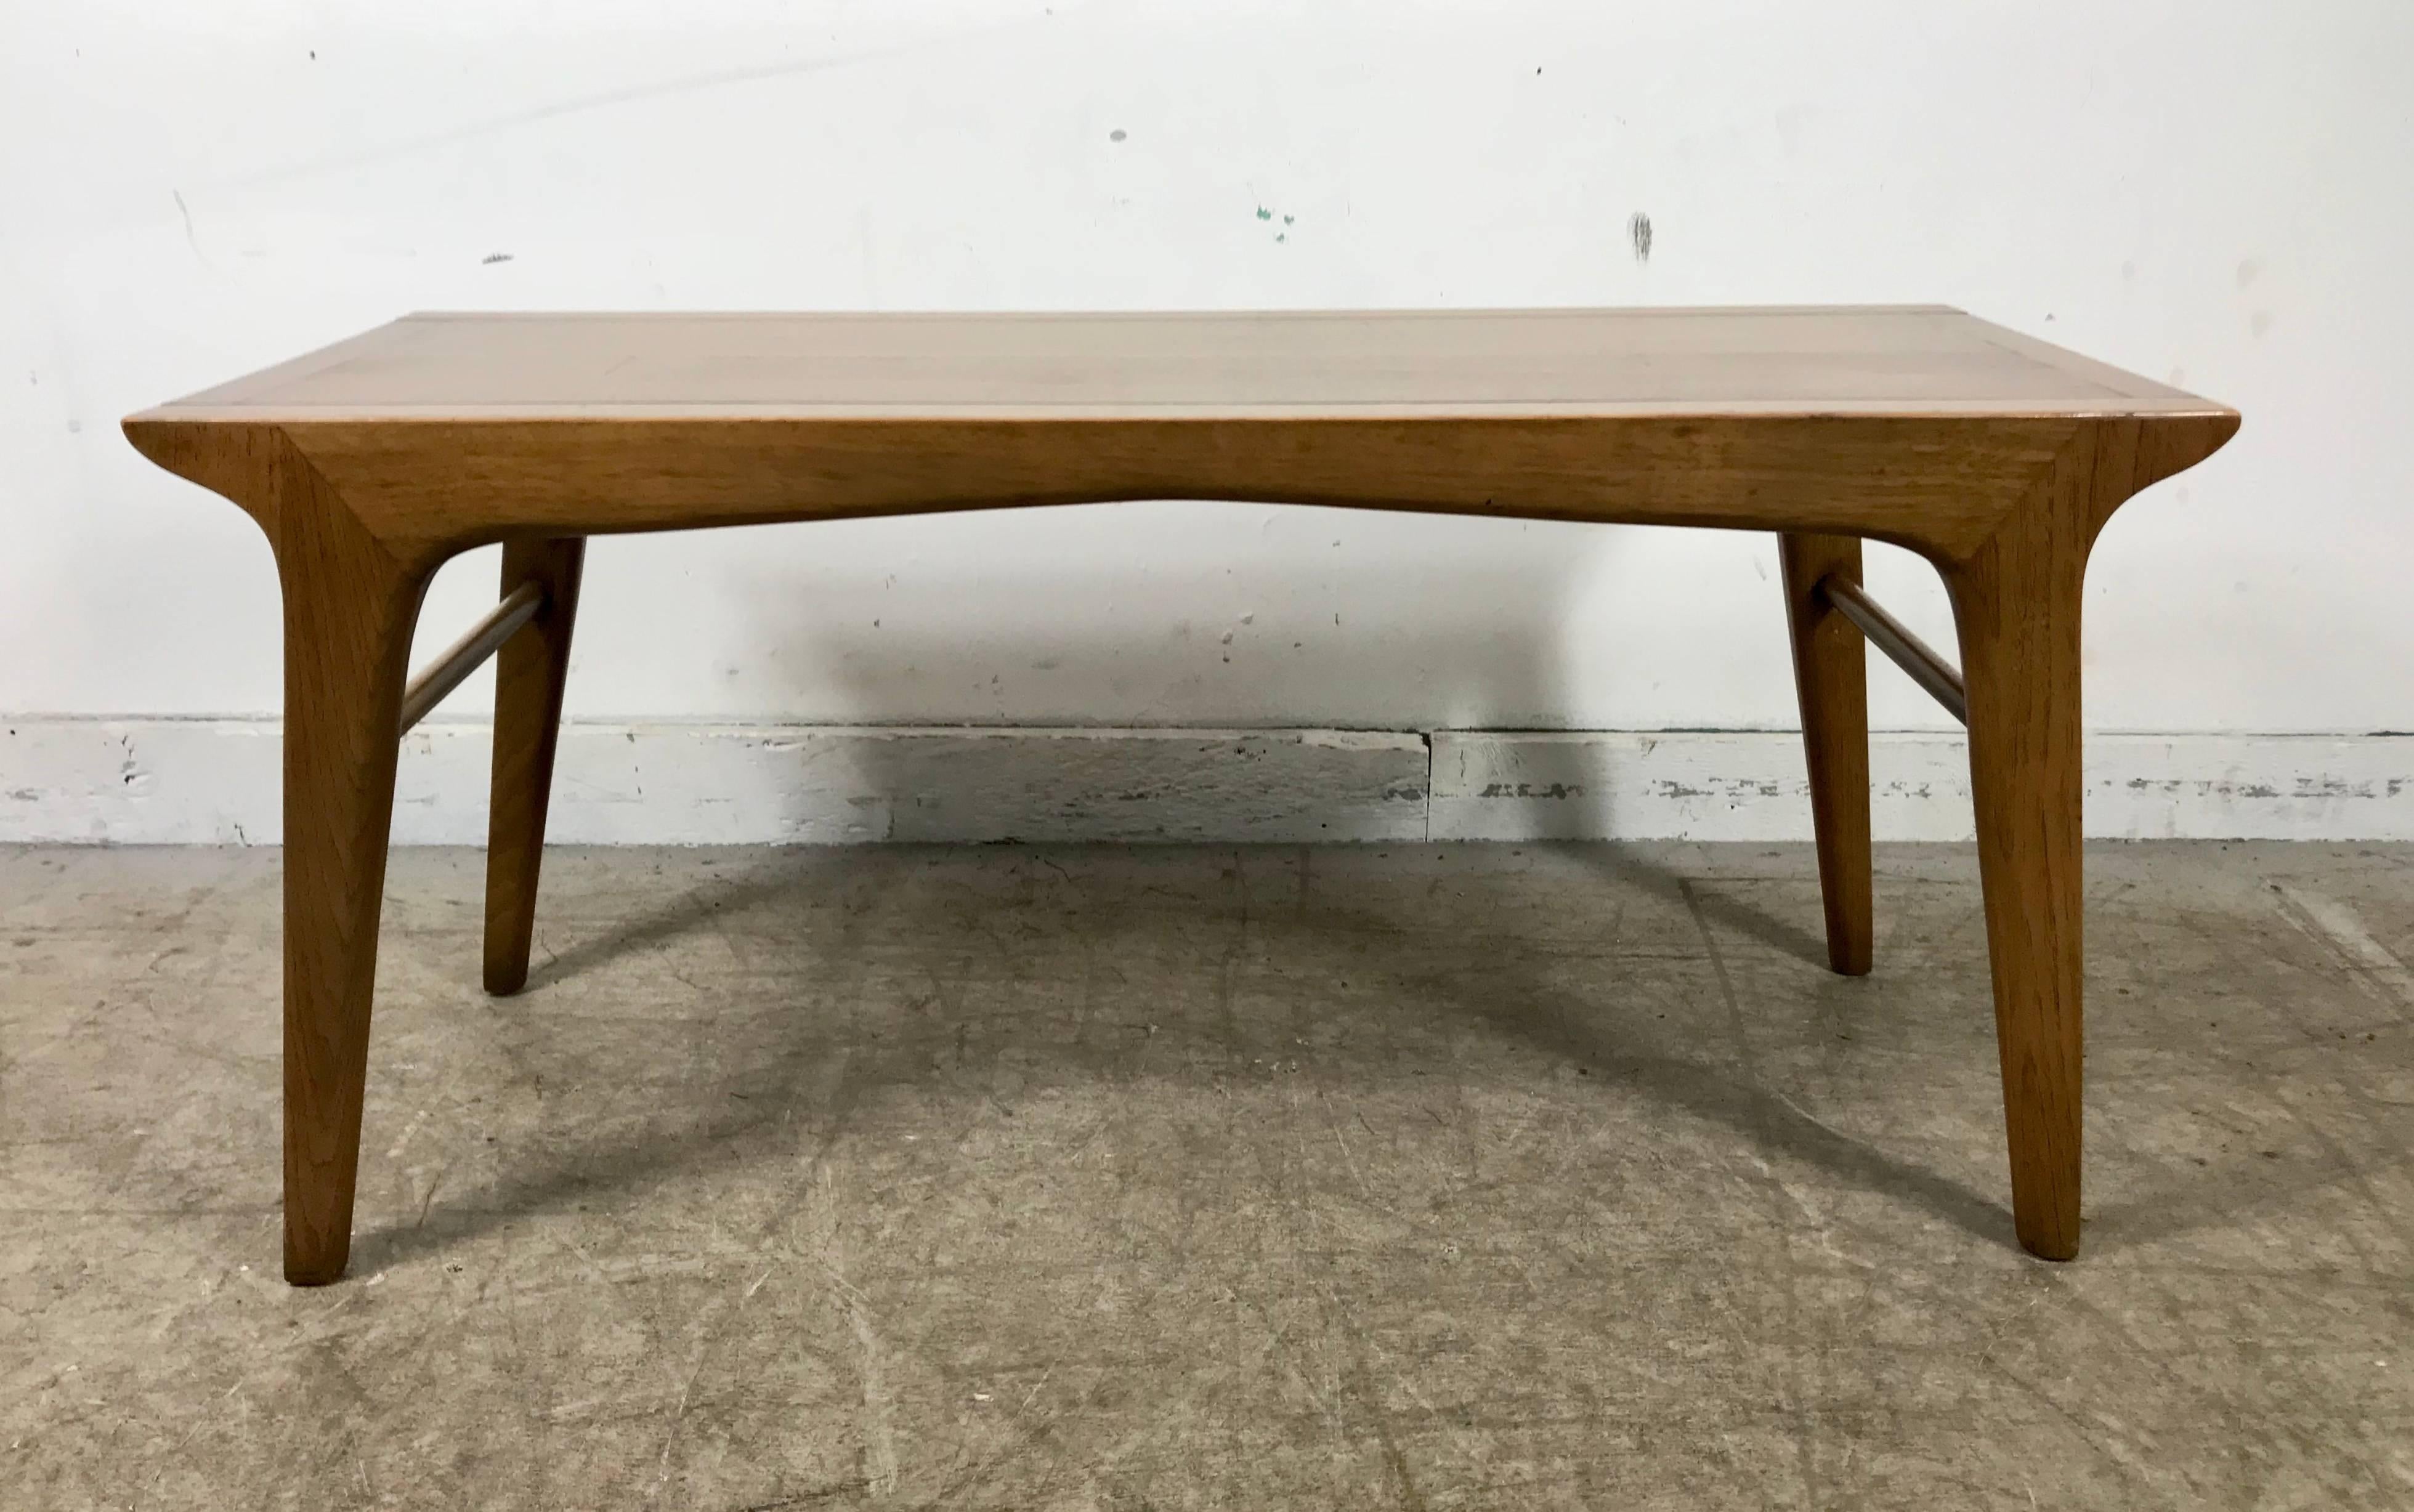 Modernist bench or table by John Van Koert for Drexel, superior quality and construction. Scaled down version of the classic dining table, simple, elegant design.